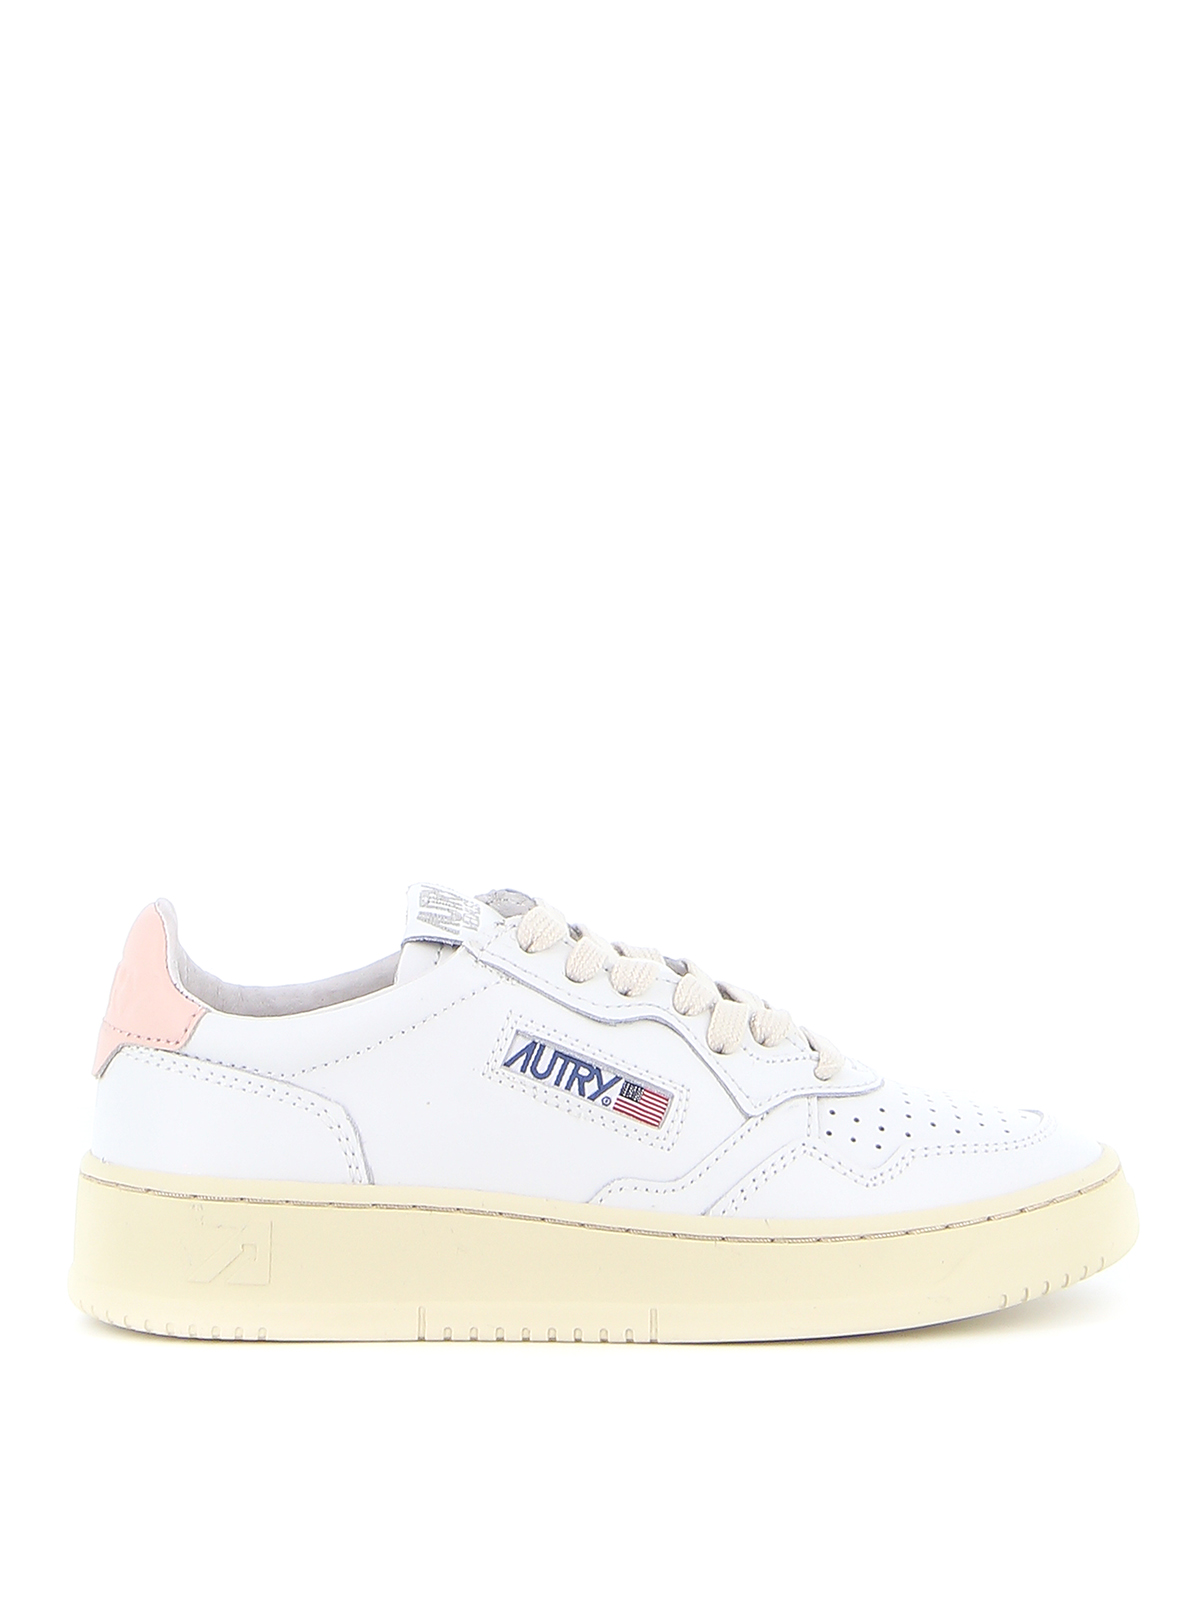 Autry Medalist Aulw Ll16 Sneakers Woman White In Leather In Blanco